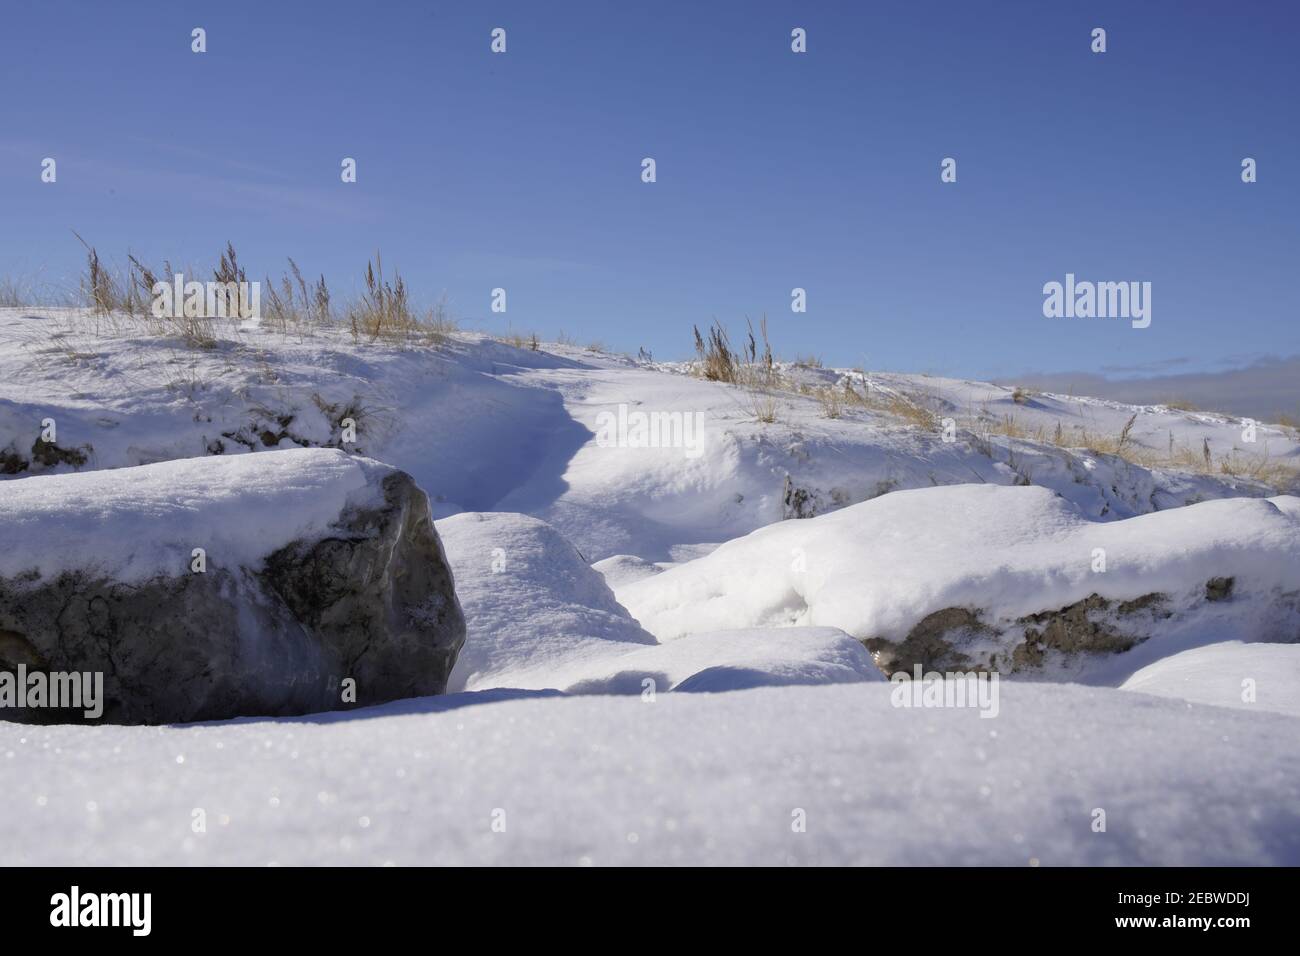 Grand Haven, Michigan, February 2021, snow covered rocks and hill, winter plants Stock Photo